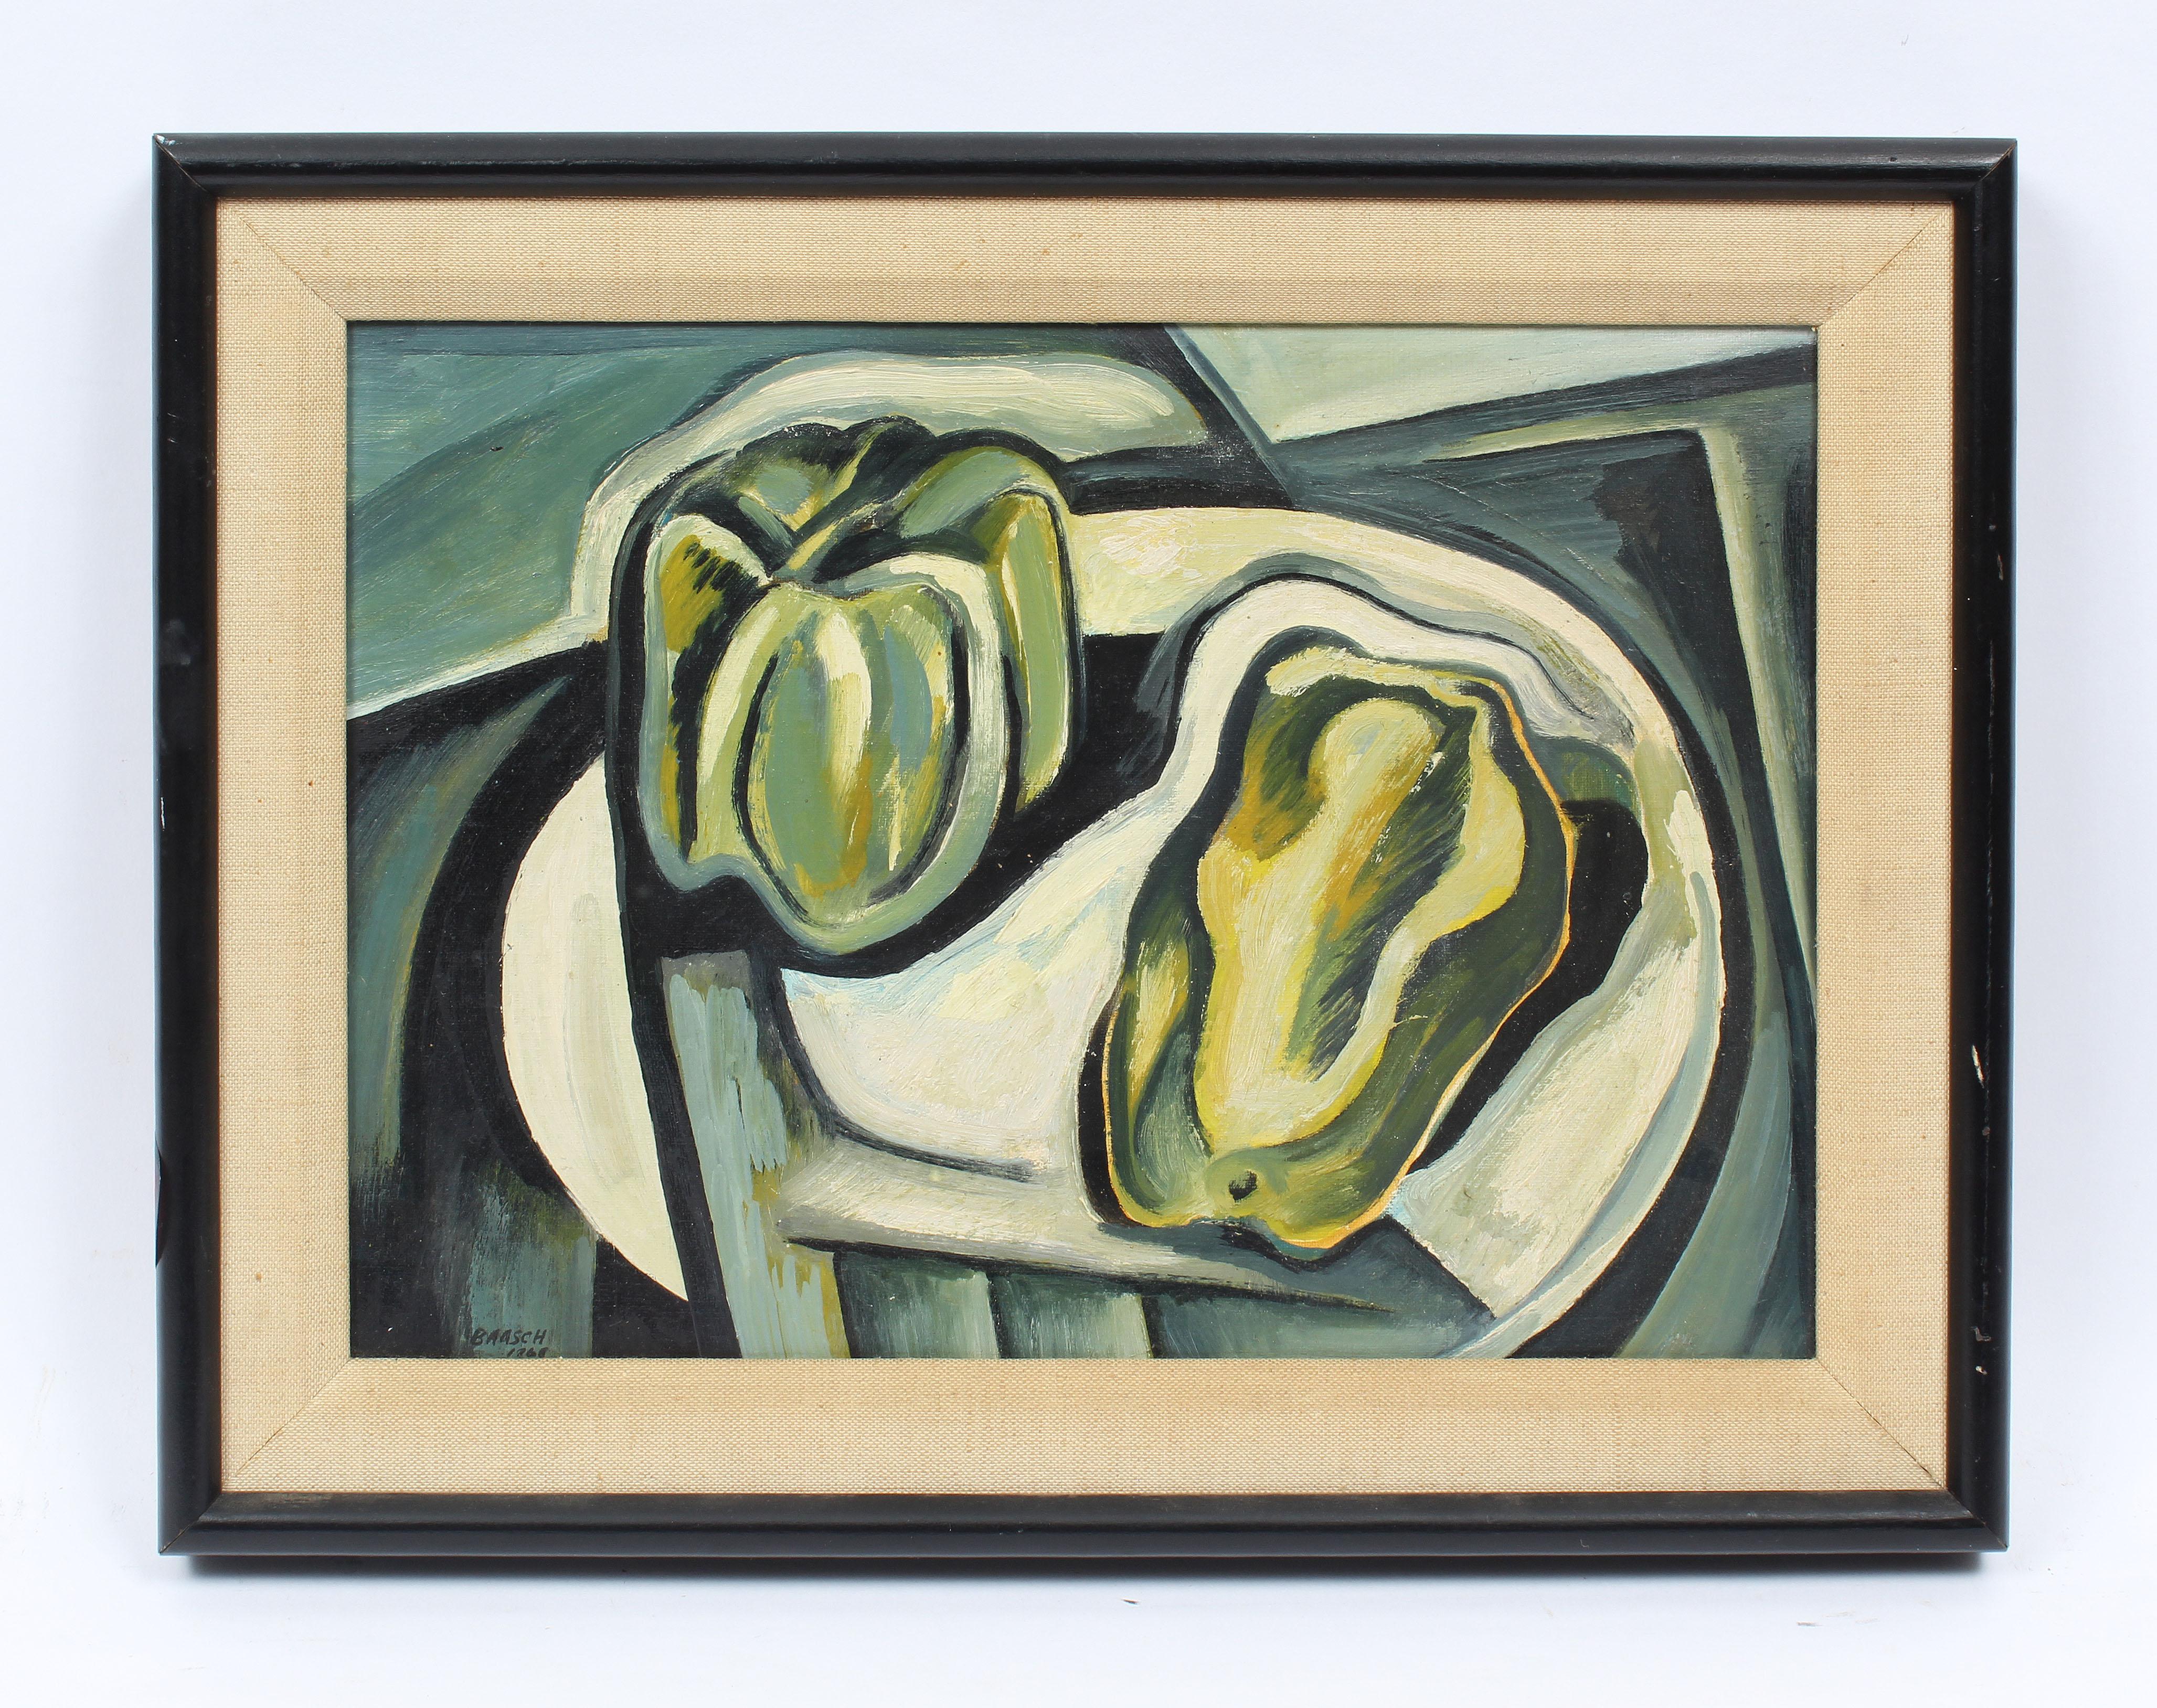 Antique American Modernist Pepper Still Life Cubist Signed Texas Oil Painting - Gray Abstract Painting by Norman Baasch